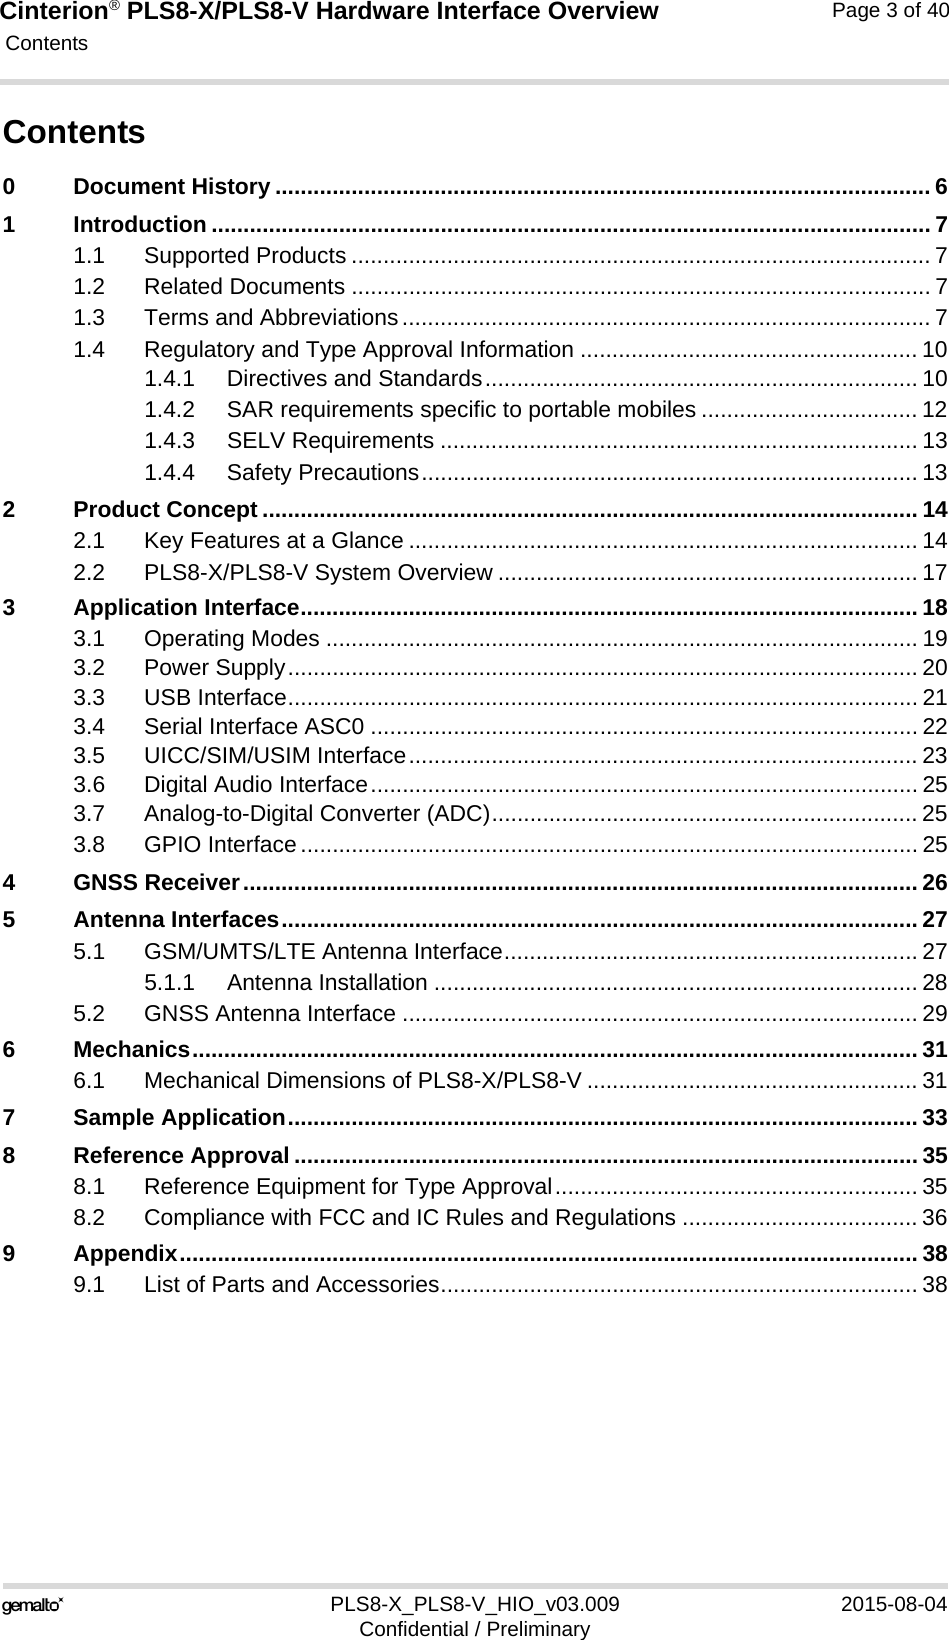 Cinterion® PLS8-X/PLS8-V Hardware Interface Overview Contents40PLS8-X_PLS8-V_HIO_v03.009 2015-08-04Confidential / PreliminaryPage 3 of 40Contents0 Document History ....................................................................................................... 61 Introduction ................................................................................................................. 71.1 Supported Products ........................................................................................... 71.2 Related Documents ........................................................................................... 71.3 Terms and Abbreviations................................................................................... 71.4 Regulatory and Type Approval Information ..................................................... 101.4.1 Directives and Standards.................................................................... 101.4.2 SAR requirements specific to portable mobiles .................................. 121.4.3 SELV Requirements ........................................................................... 131.4.4 Safety Precautions.............................................................................. 132 Product Concept ....................................................................................................... 142.1 Key Features at a Glance ................................................................................ 142.2 PLS8-X/PLS8-V System Overview .................................................................. 173 Application Interface................................................................................................. 183.1 Operating Modes ............................................................................................. 193.2 Power Supply................................................................................................... 203.3 USB Interface................................................................................................... 213.4 Serial Interface ASC0 ...................................................................................... 223.5 UICC/SIM/USIM Interface................................................................................ 233.6 Digital Audio Interface...................................................................................... 253.7 Analog-to-Digital Converter (ADC)................................................................... 253.8 GPIO Interface................................................................................................. 254 GNSS Receiver.......................................................................................................... 265 Antenna Interfaces.................................................................................................... 275.1 GSM/UMTS/LTE Antenna Interface................................................................. 275.1.1 Antenna Installation ............................................................................ 285.2 GNSS Antenna Interface ................................................................................. 296 Mechanics.................................................................................................................. 316.1 Mechanical Dimensions of PLS8-X/PLS8-V .................................................... 317 Sample Application................................................................................................... 338 Reference Approval .................................................................................................. 358.1 Reference Equipment for Type Approval......................................................... 358.2 Compliance with FCC and IC Rules and Regulations ..................................... 369 Appendix.................................................................................................................... 389.1 List of Parts and Accessories........................................................................... 38